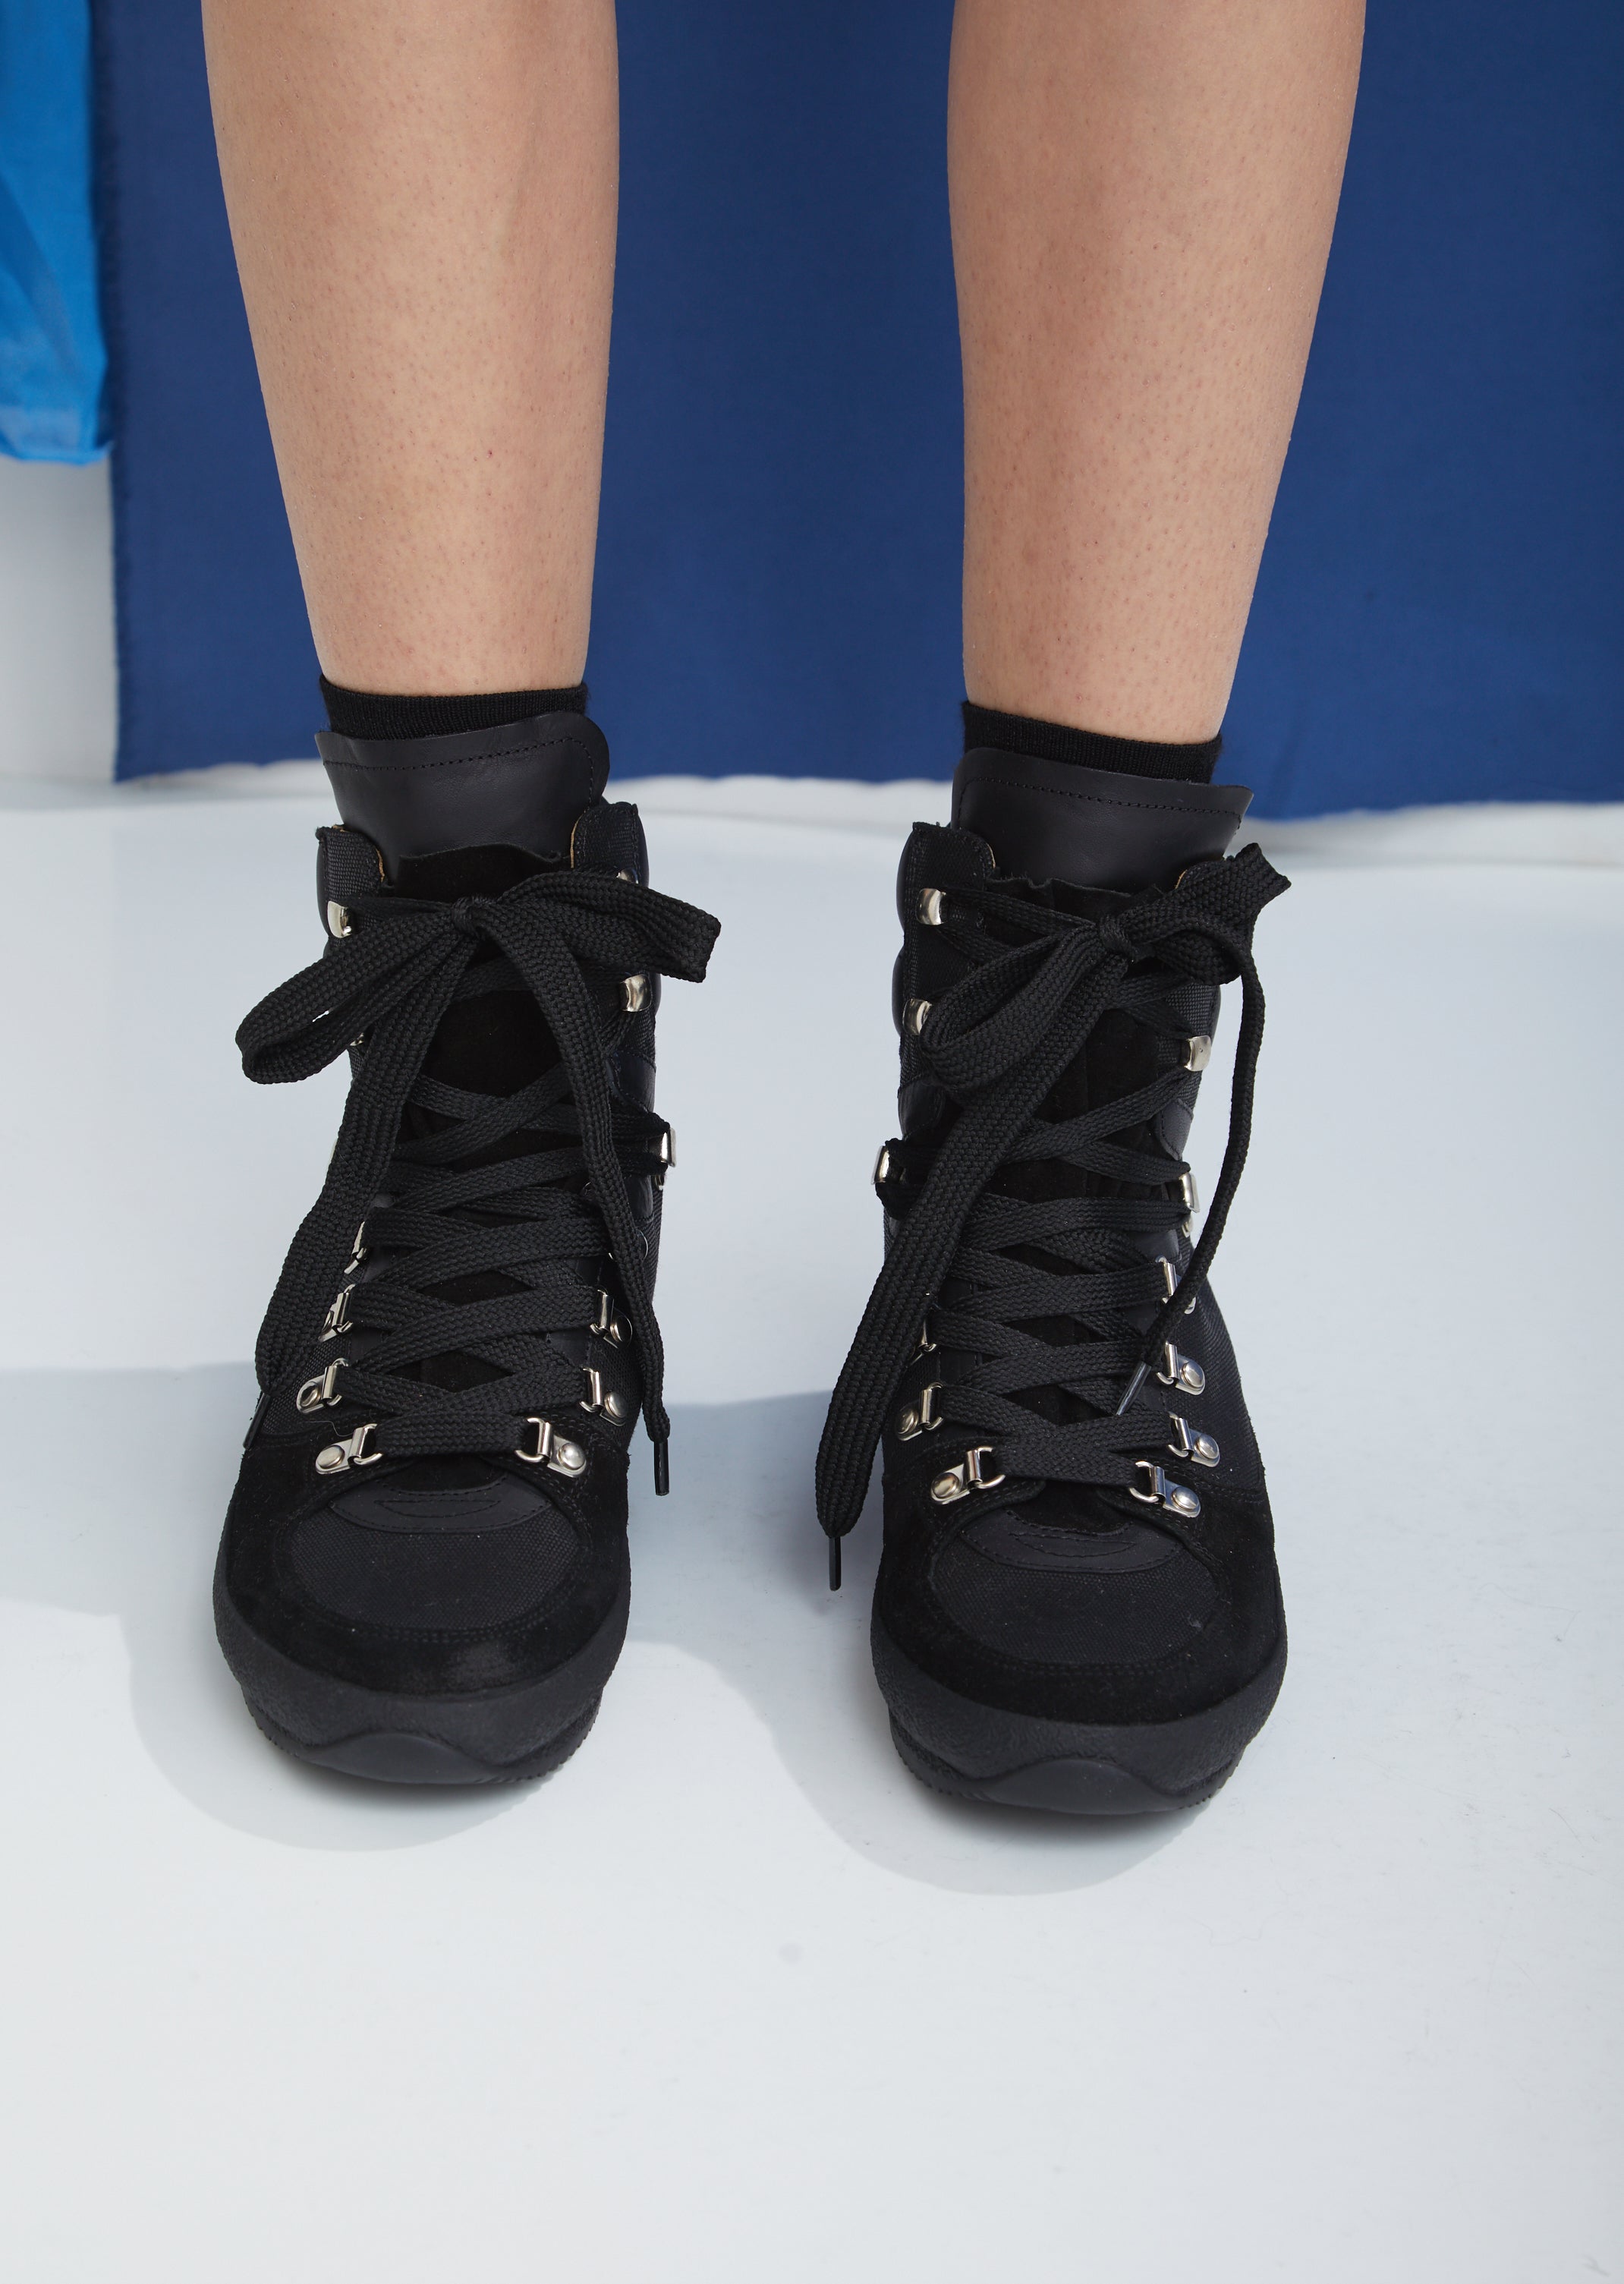 isabel marant brendty hiking boots